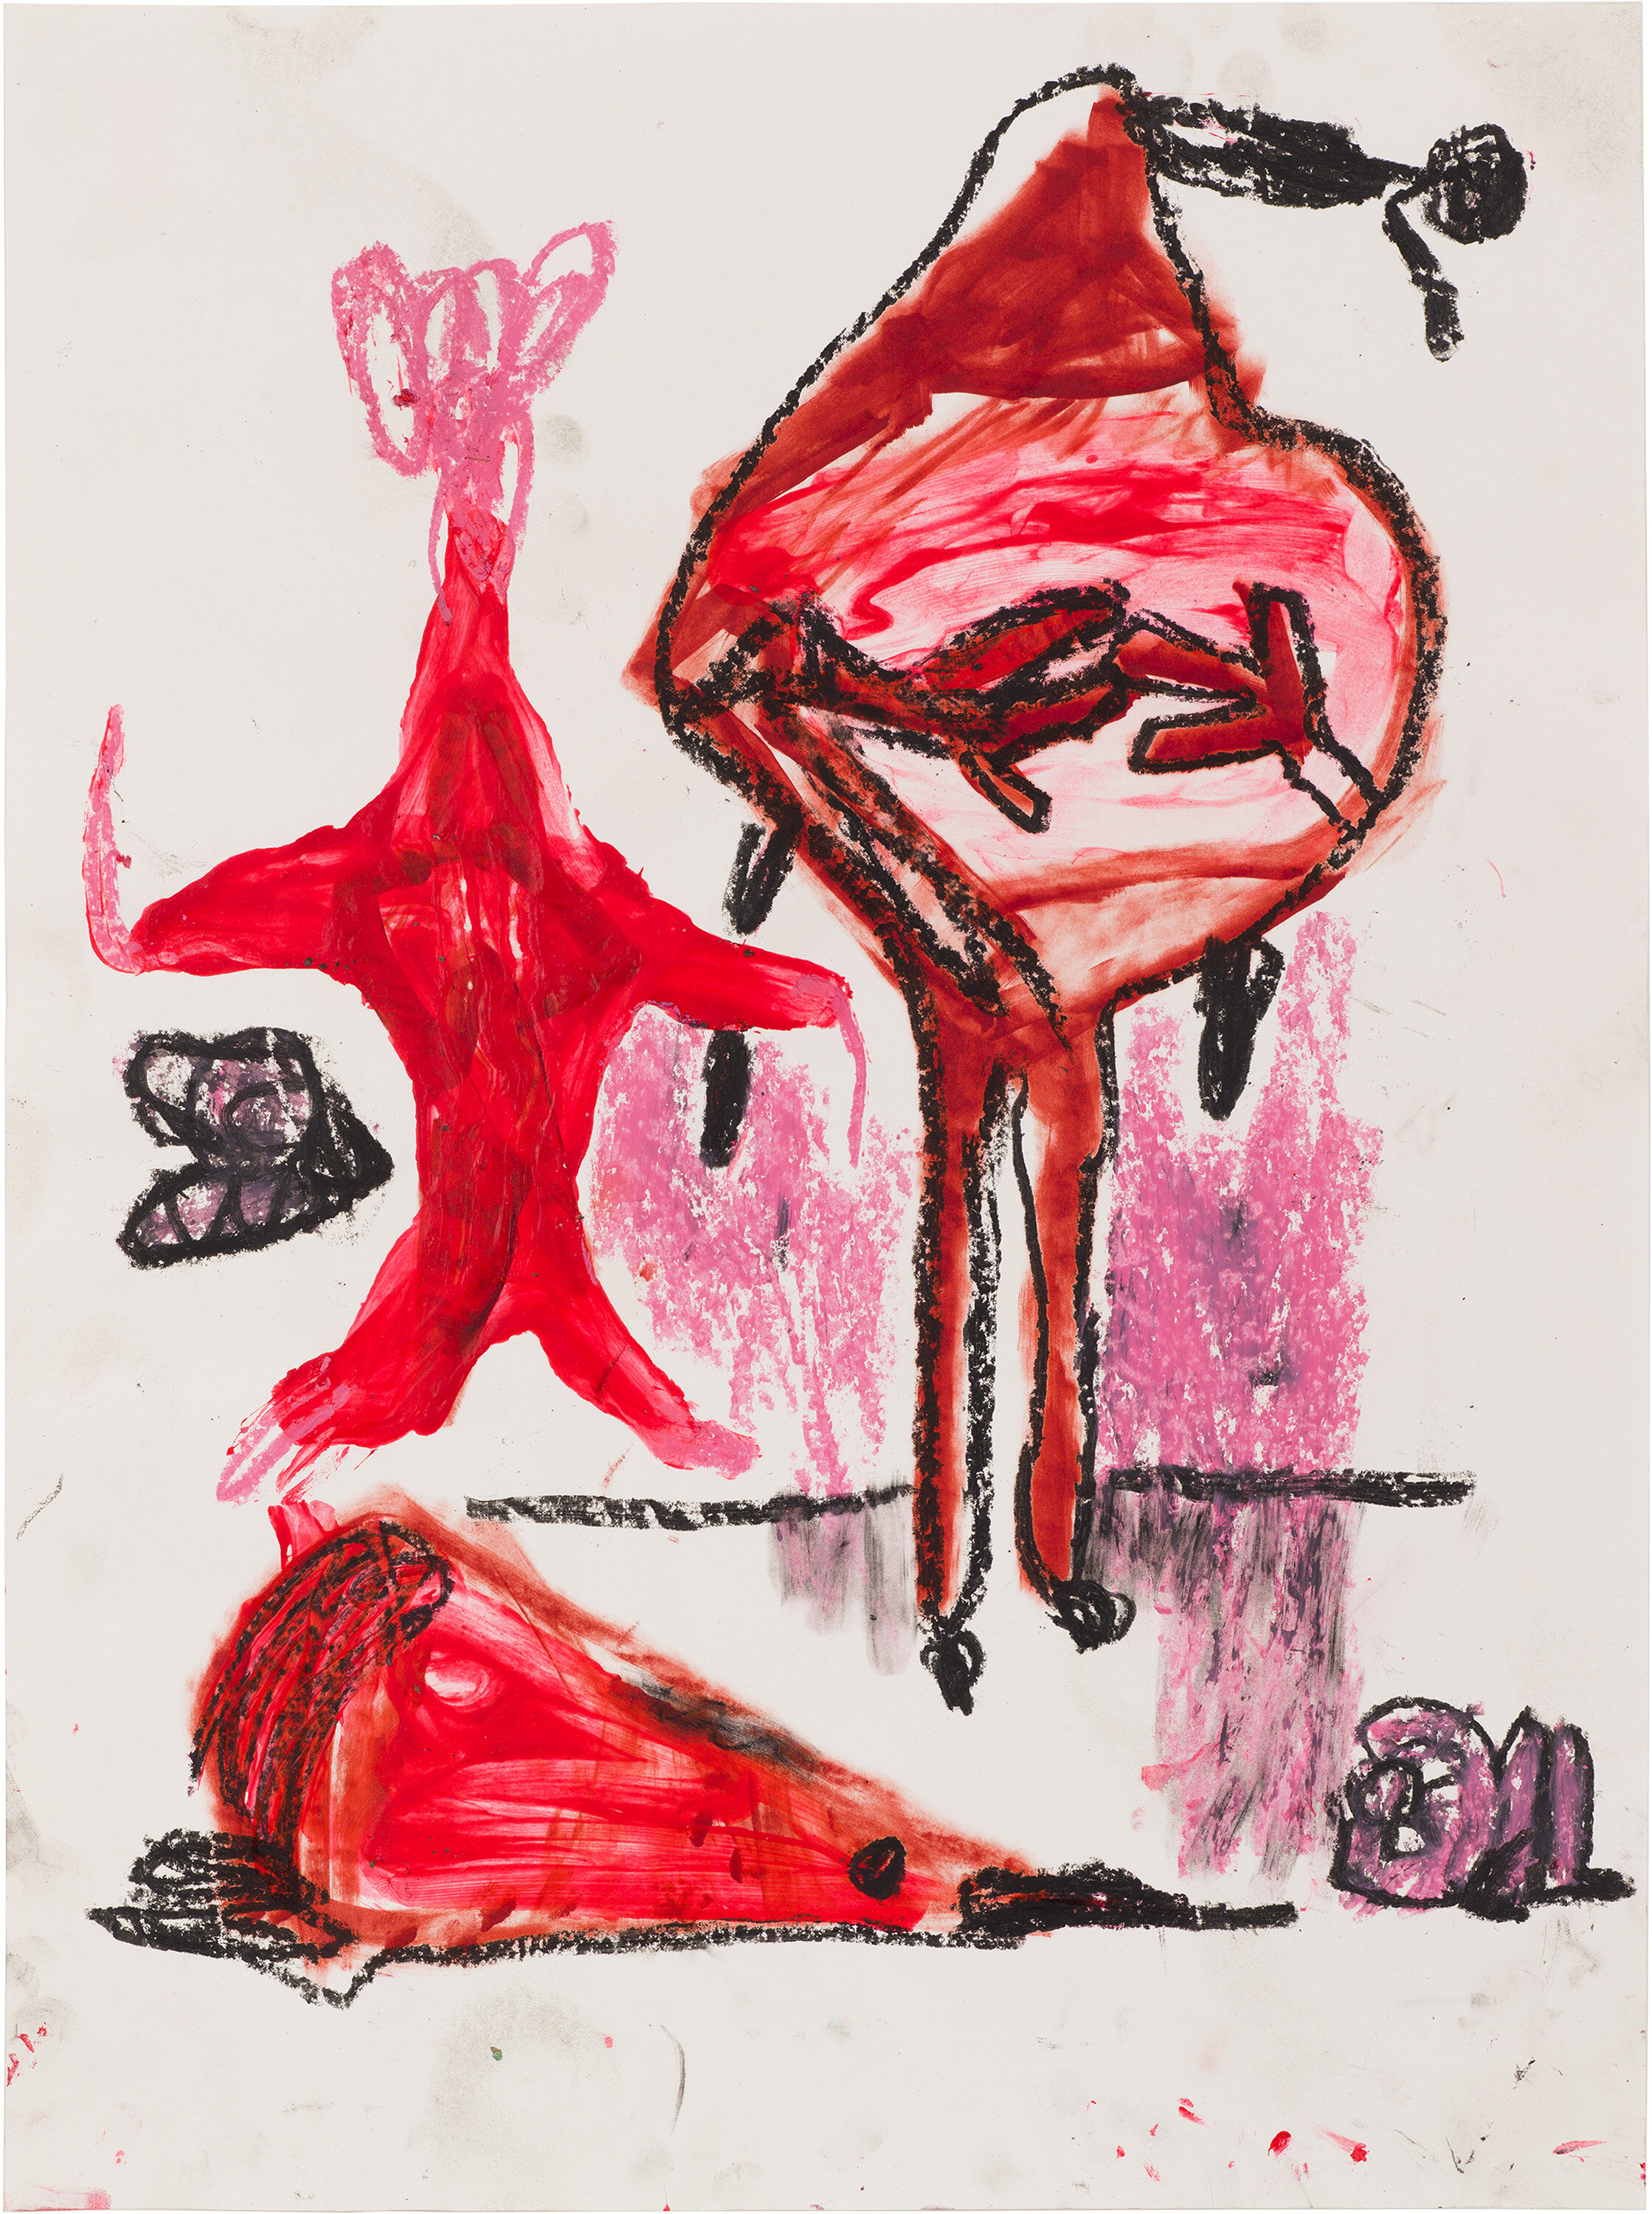  Drew Beattie and Ben Shepard   DBBS-DRW-2015-497   2015  acrylic and oil stick on paper  24 x 18 inches 